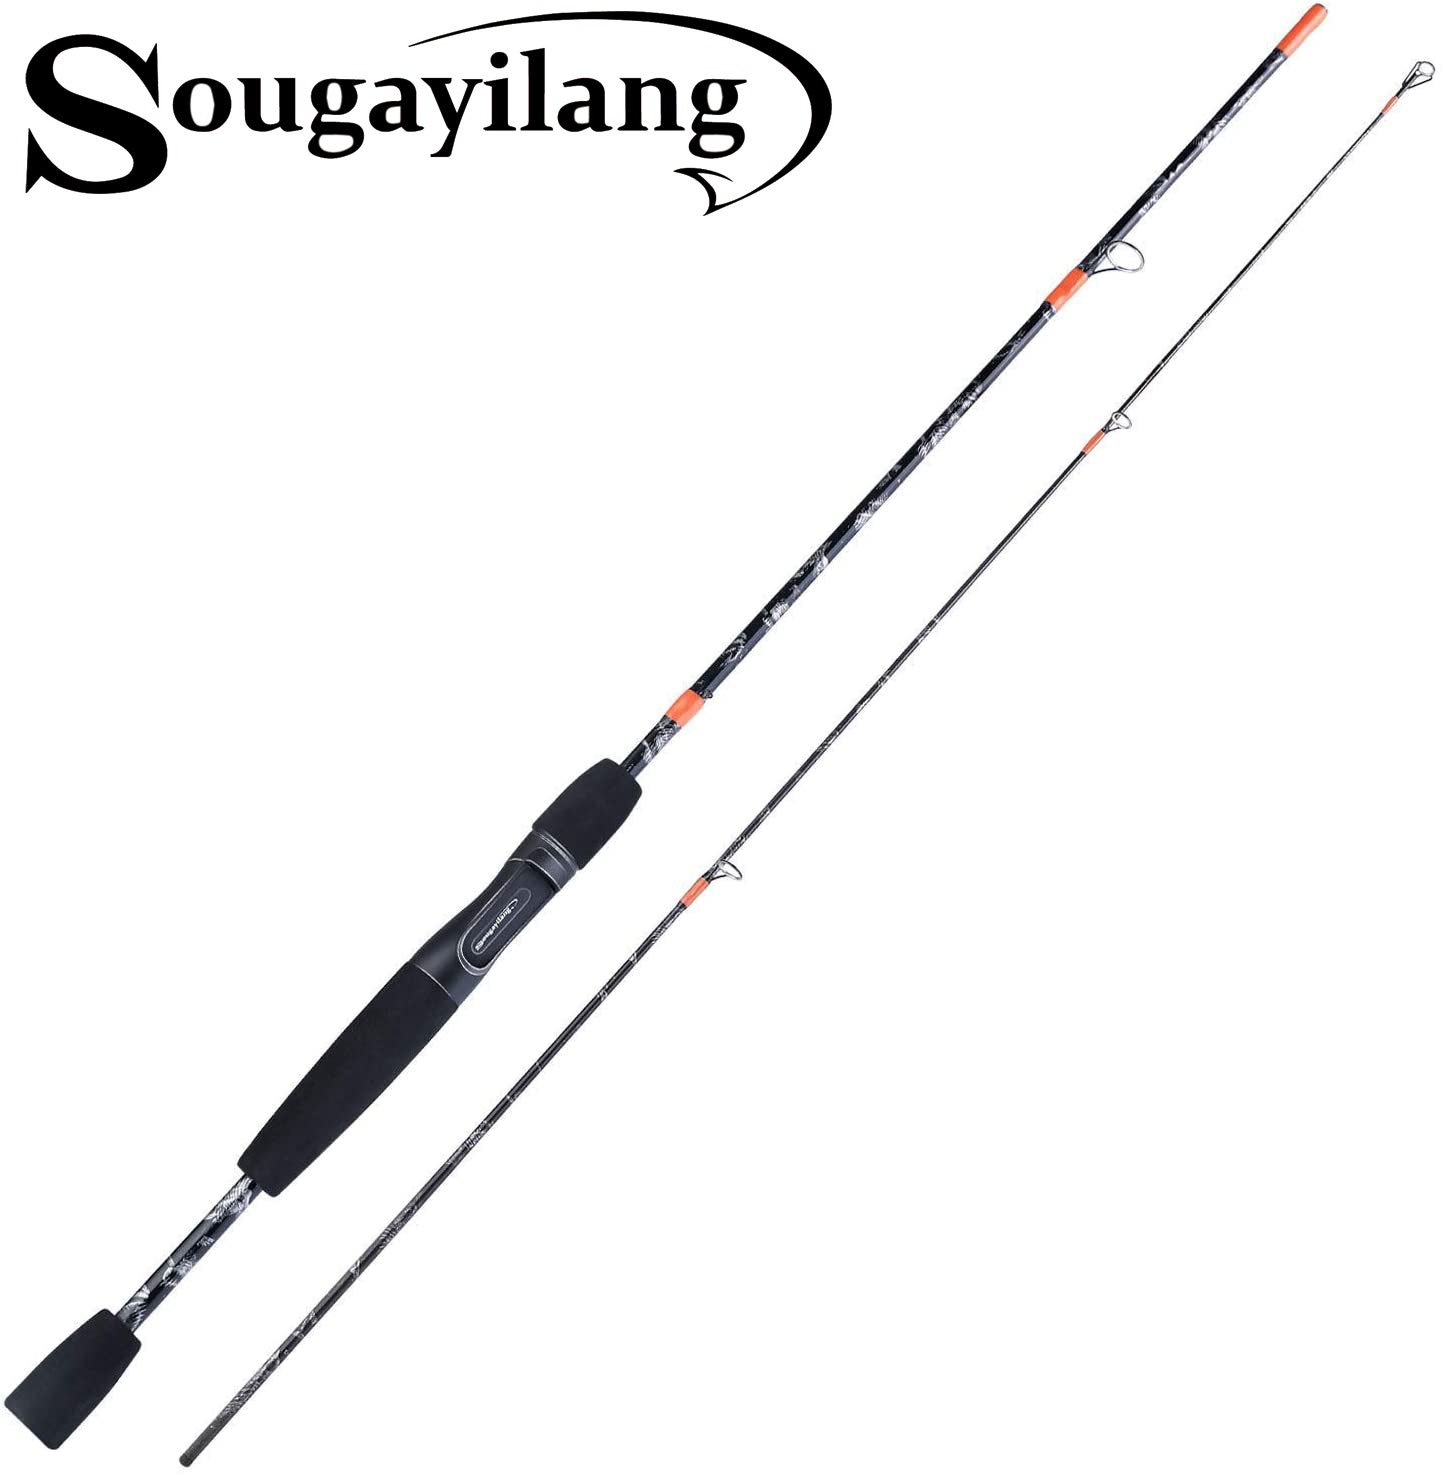 Sougayilang 1pc 2-section Fishing Rod, 168cm/5.5ft Color-Painted Rod, Fast  Action ML Power Fishing Pole, Spinning & Casting Rod For Freshwater